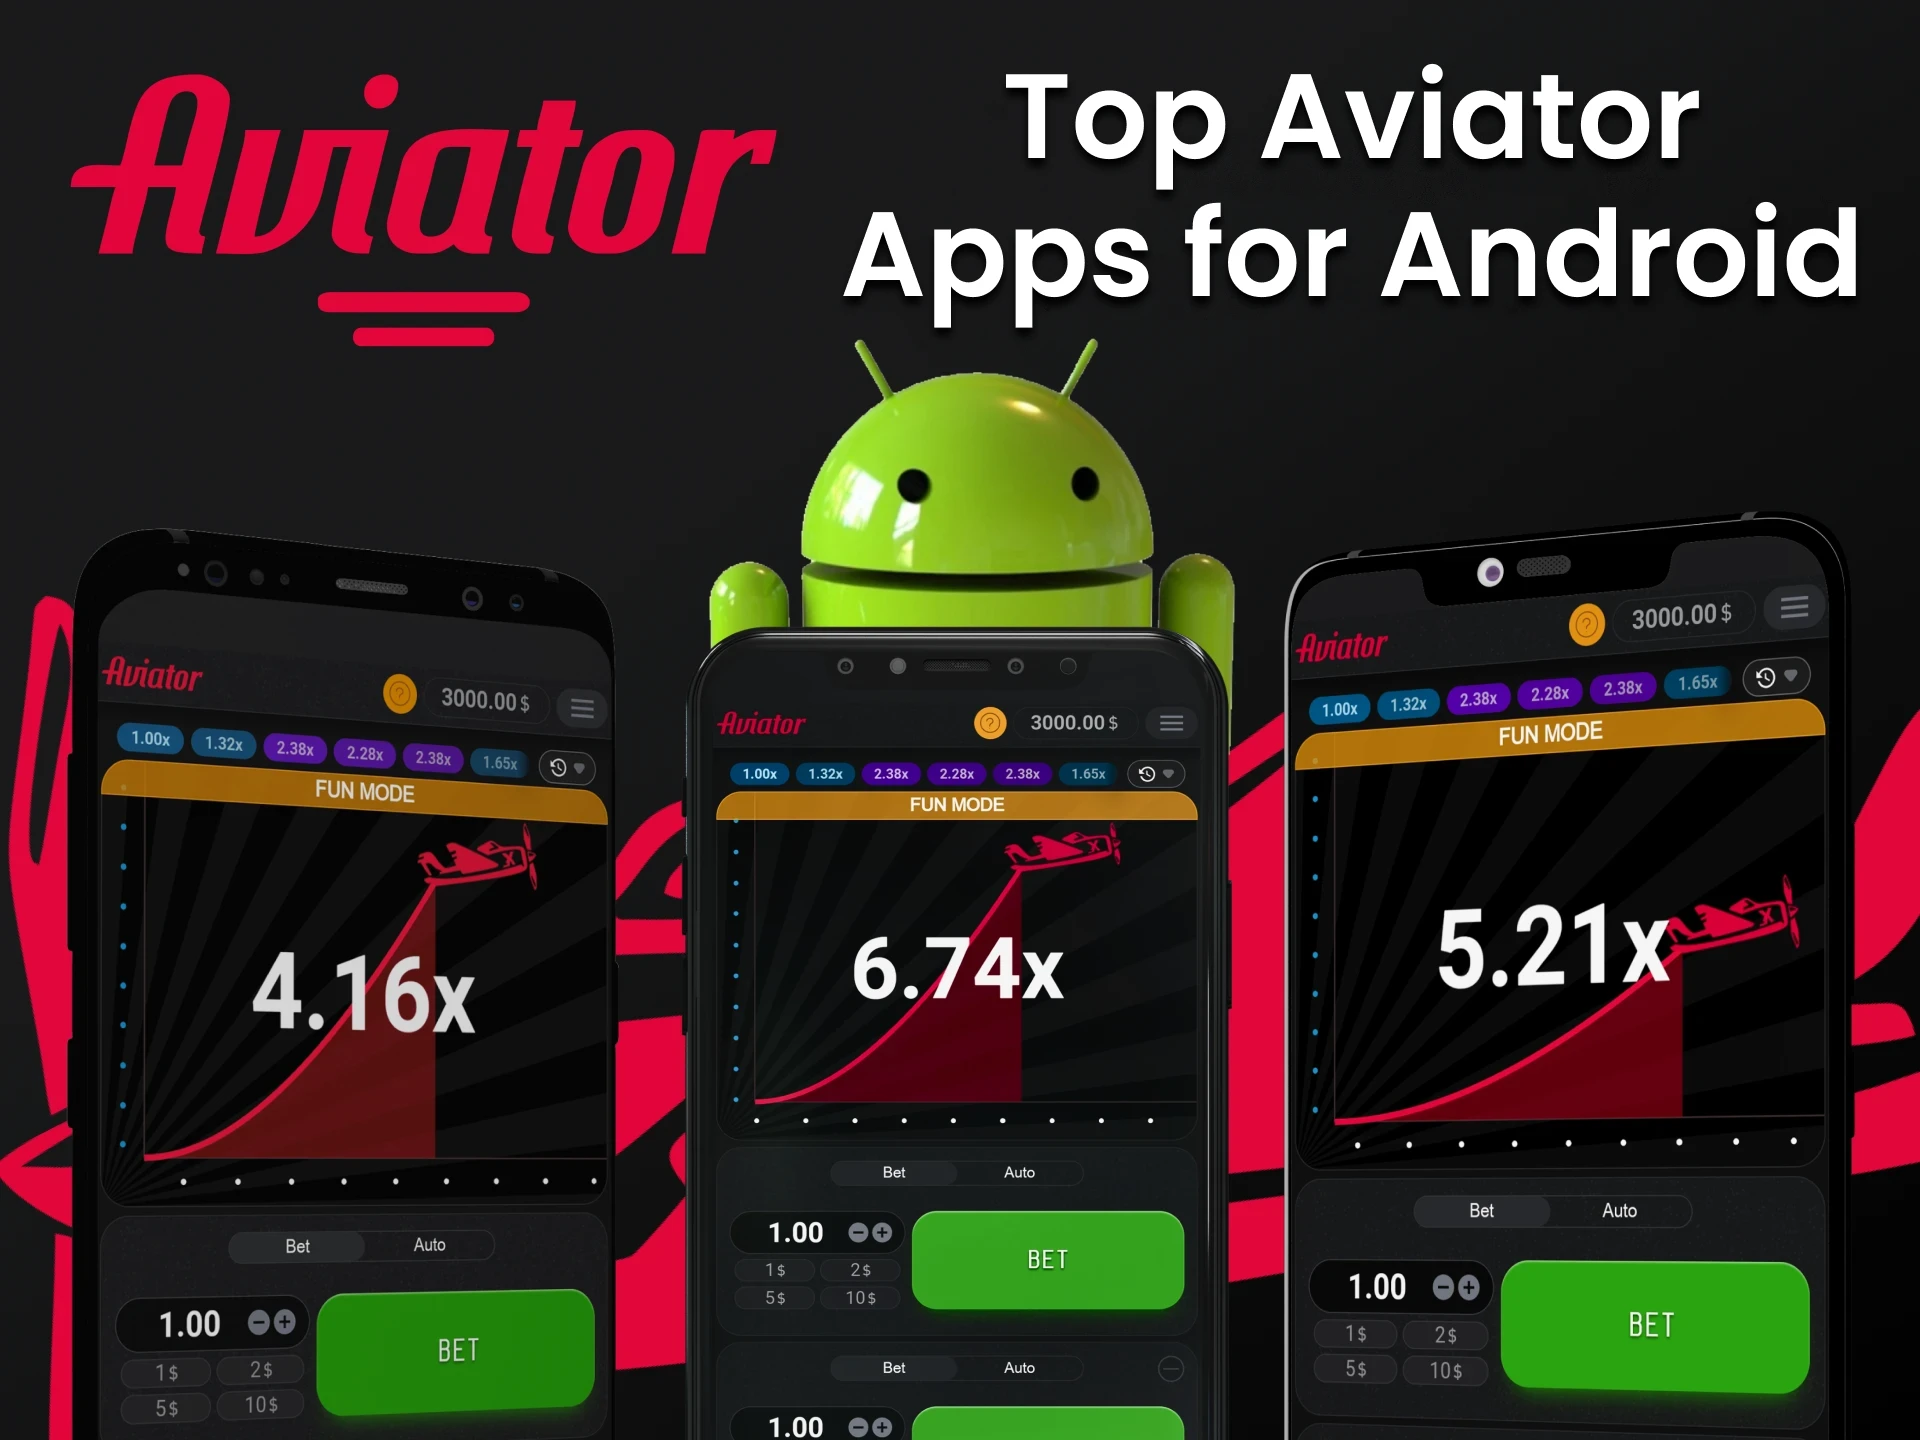 Choose the top 5 apps for Android to play Aviator.